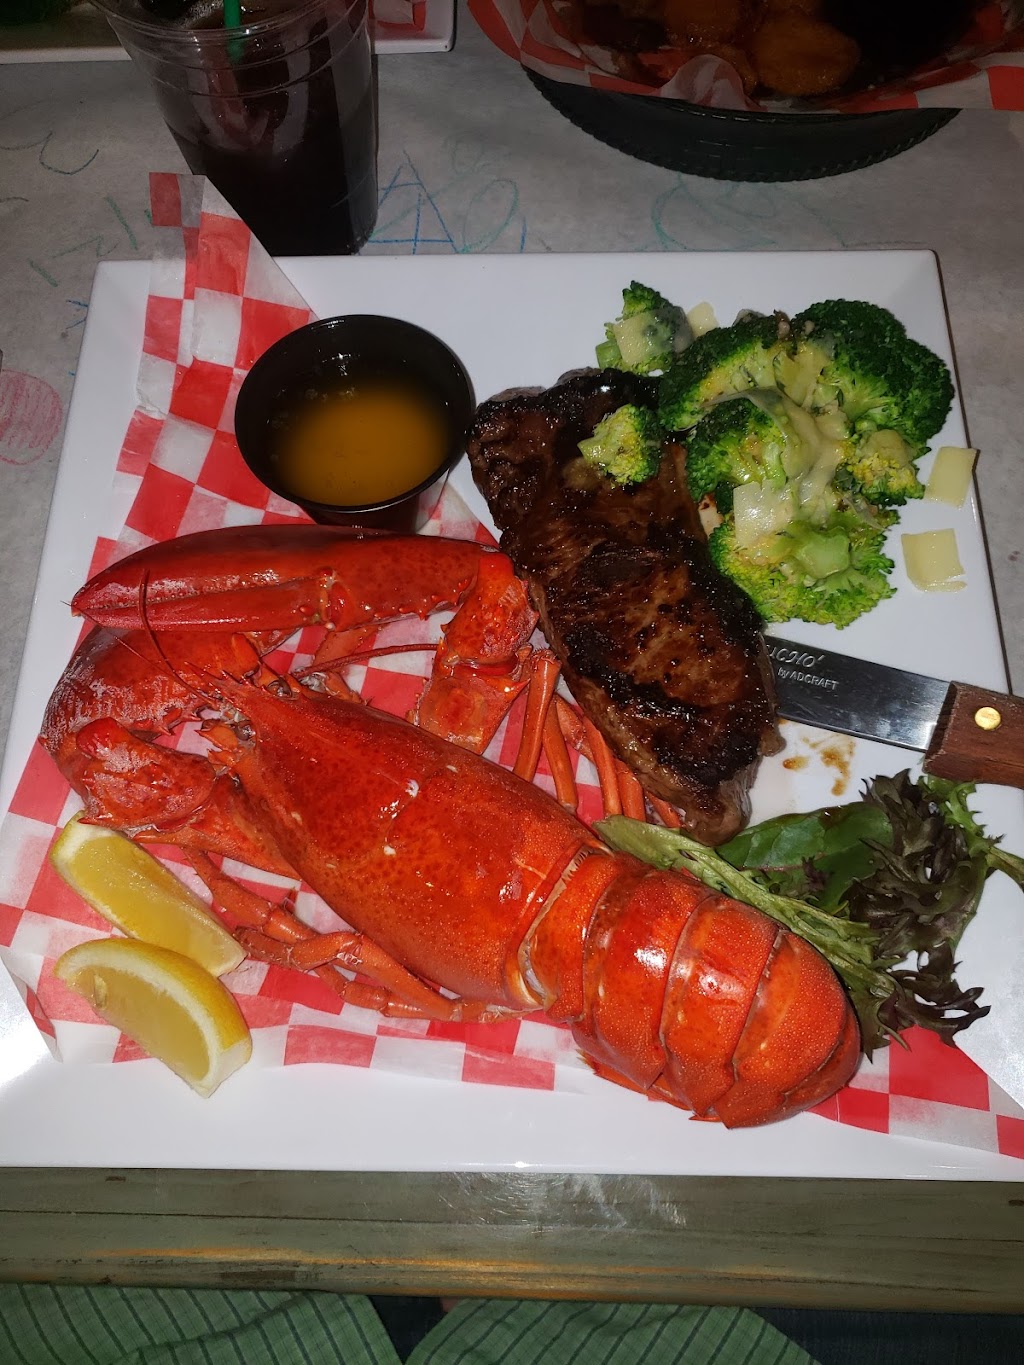 Lulu’s Lobster & Wing Shack | 388 Medford Ave, Patchogue, NY 11772 | Phone: (631) 207-9464